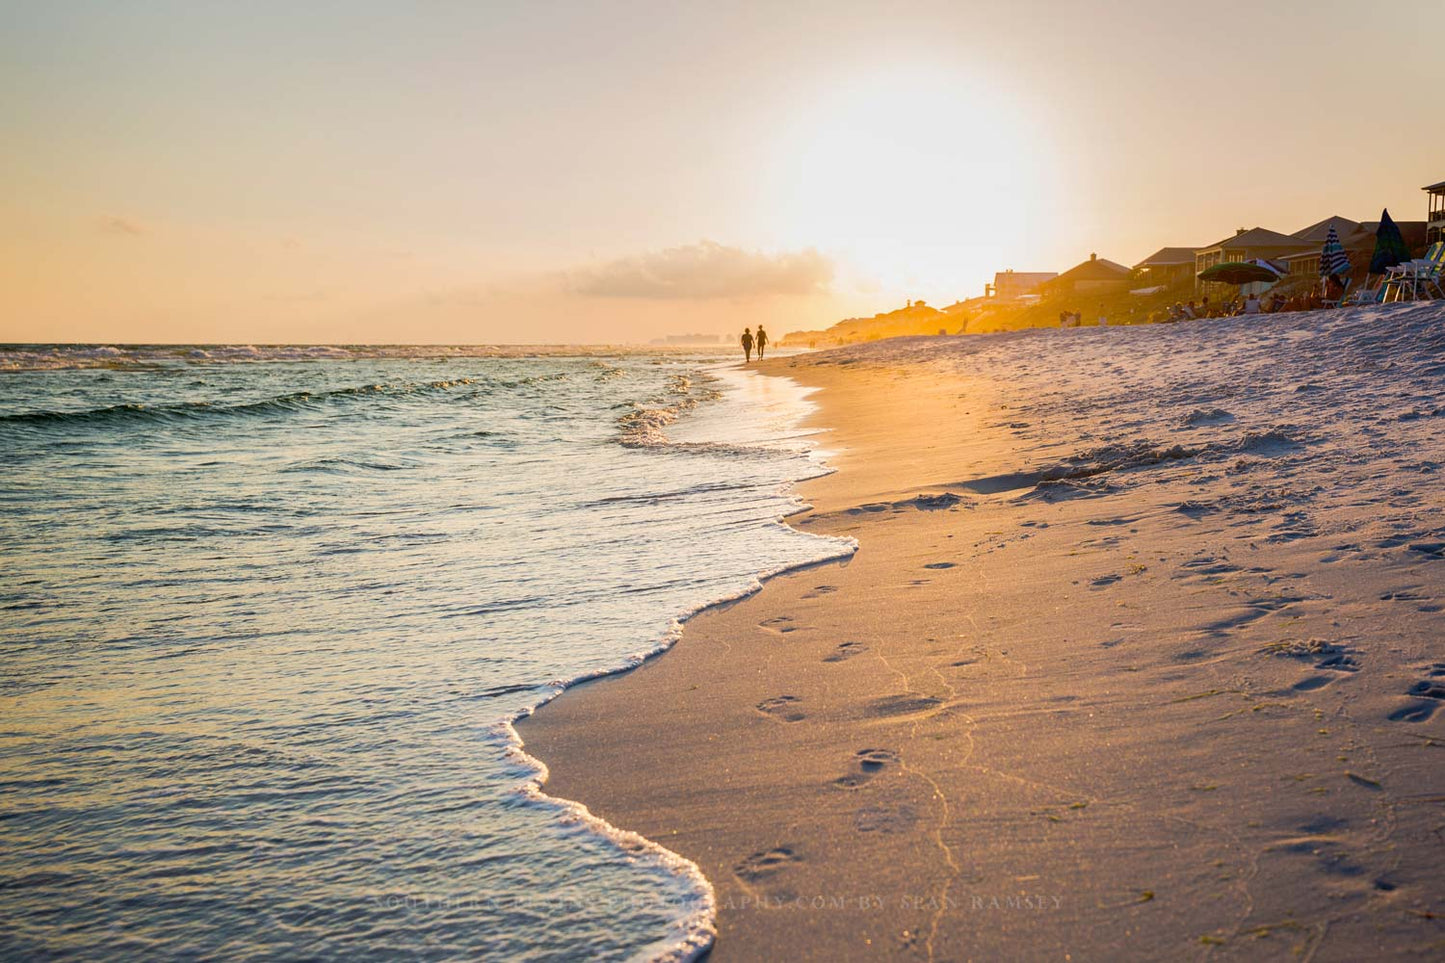 People walk along the beach leaving footprints as waves roll ashore at sunset along the Gulf Coast in Destin, Florida.